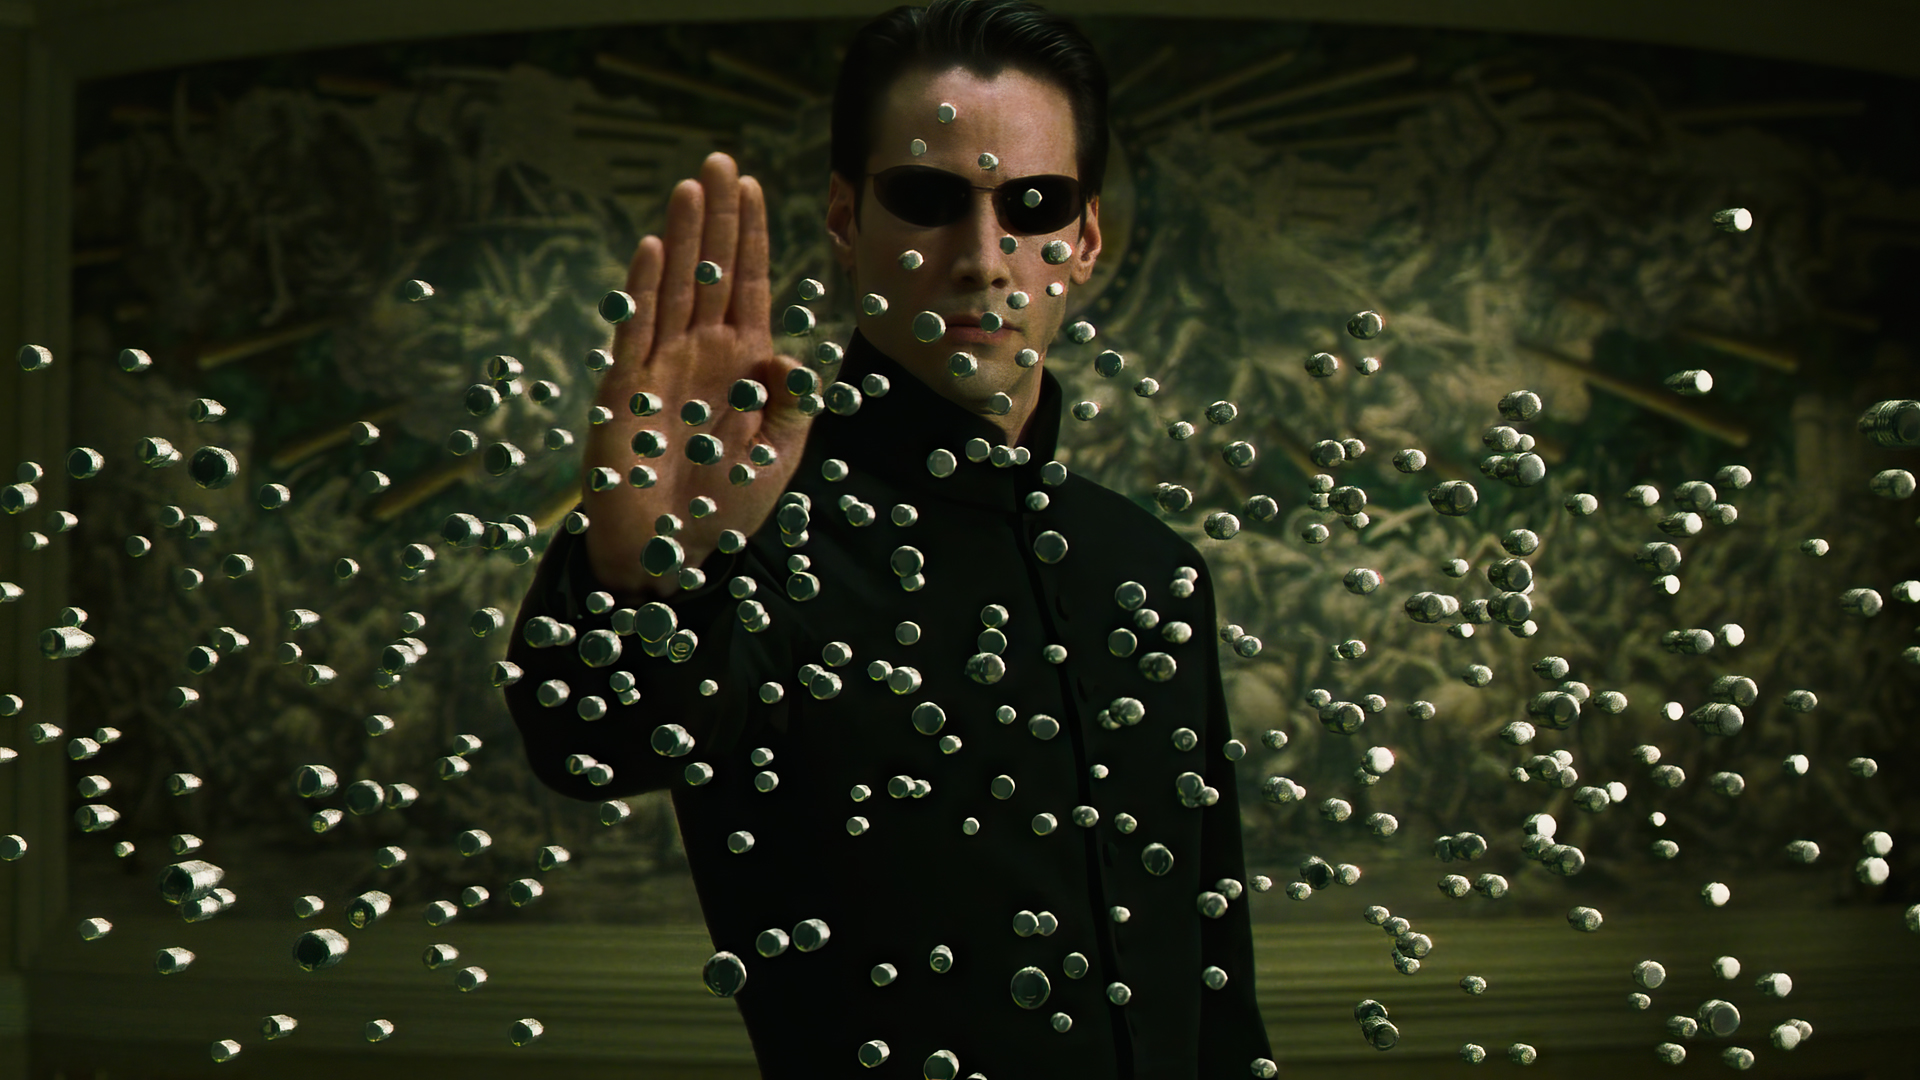 You Can Now Bid on Neo's Actual Outfit From 'The Matrix Reloaded'